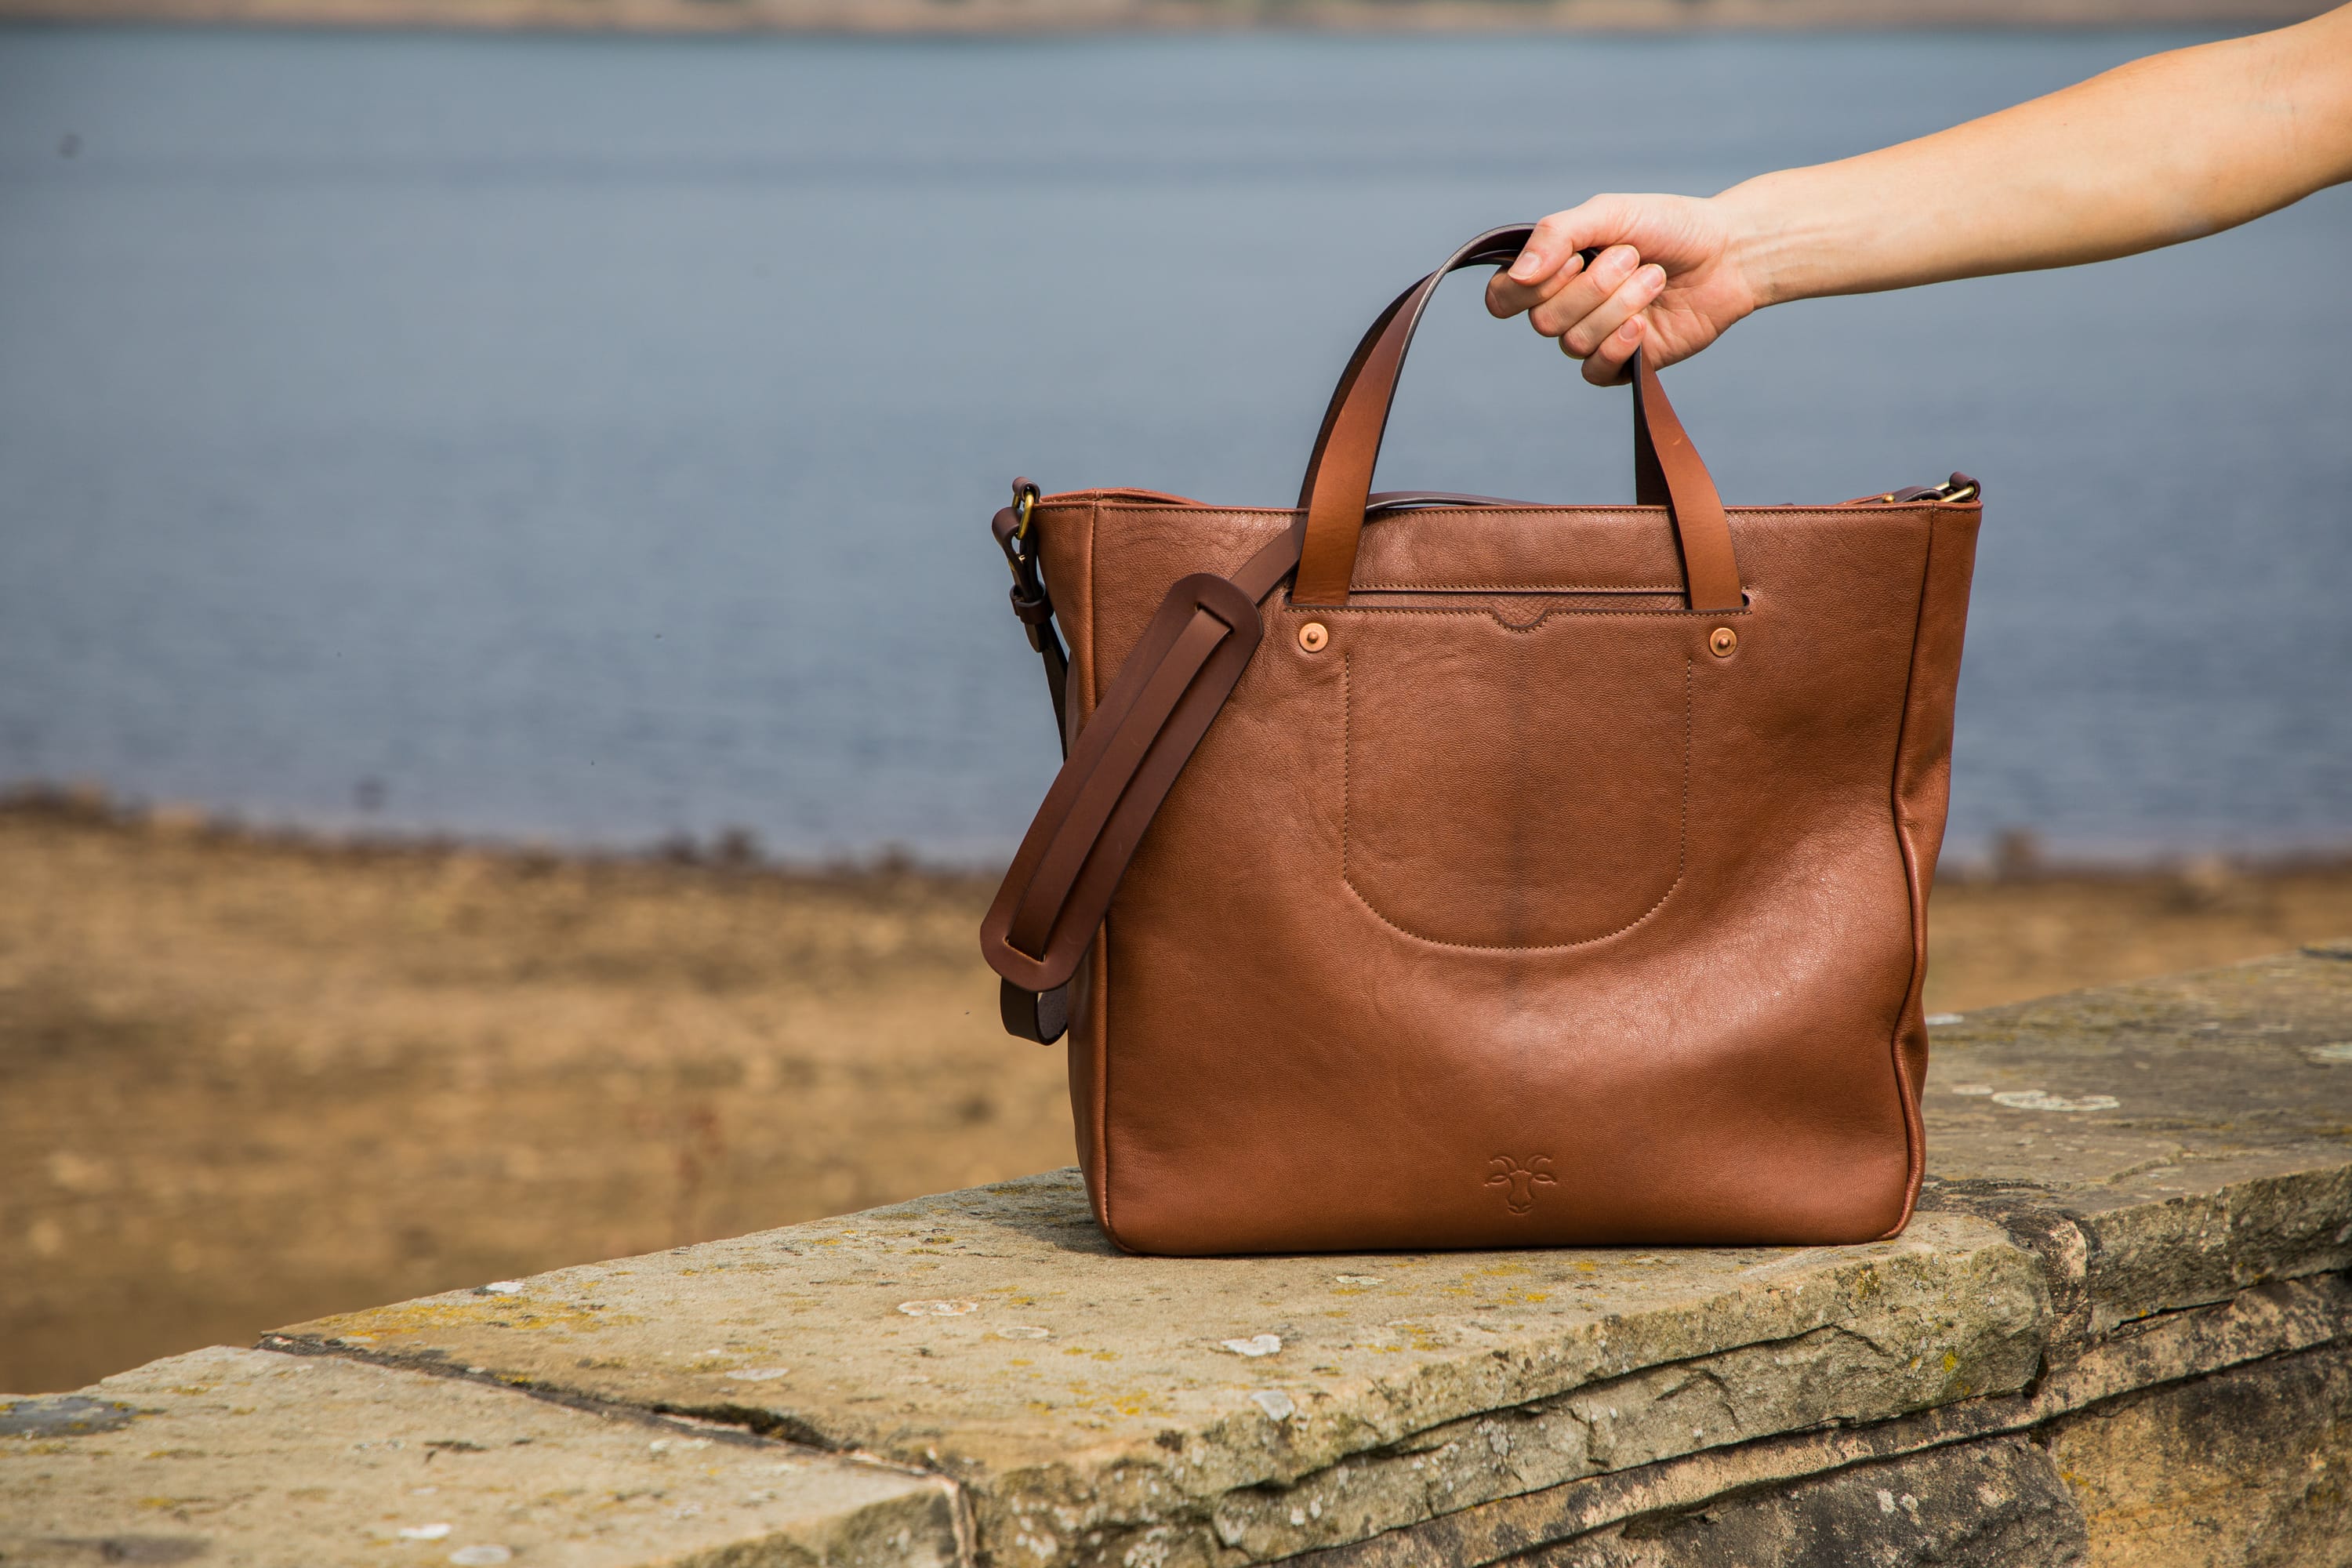 Sustainable leather bags and handbags that'll last you a lifetime